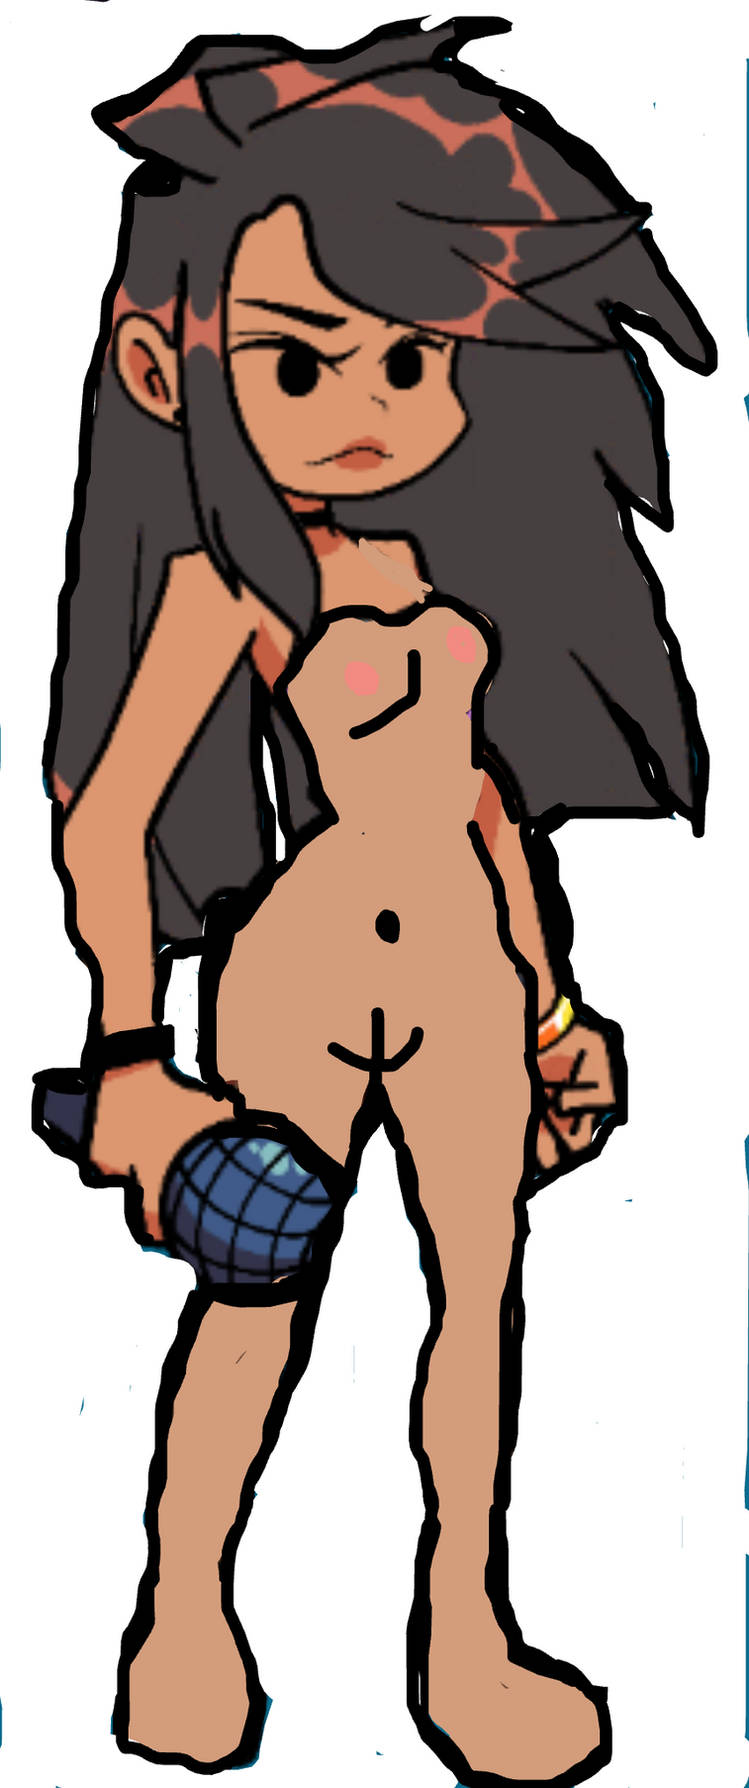 angry ayana_(friday_night_funkin) bad_drawing_skills completely_nude completely_nude_female friday_night_funkin nude nude_female white_background